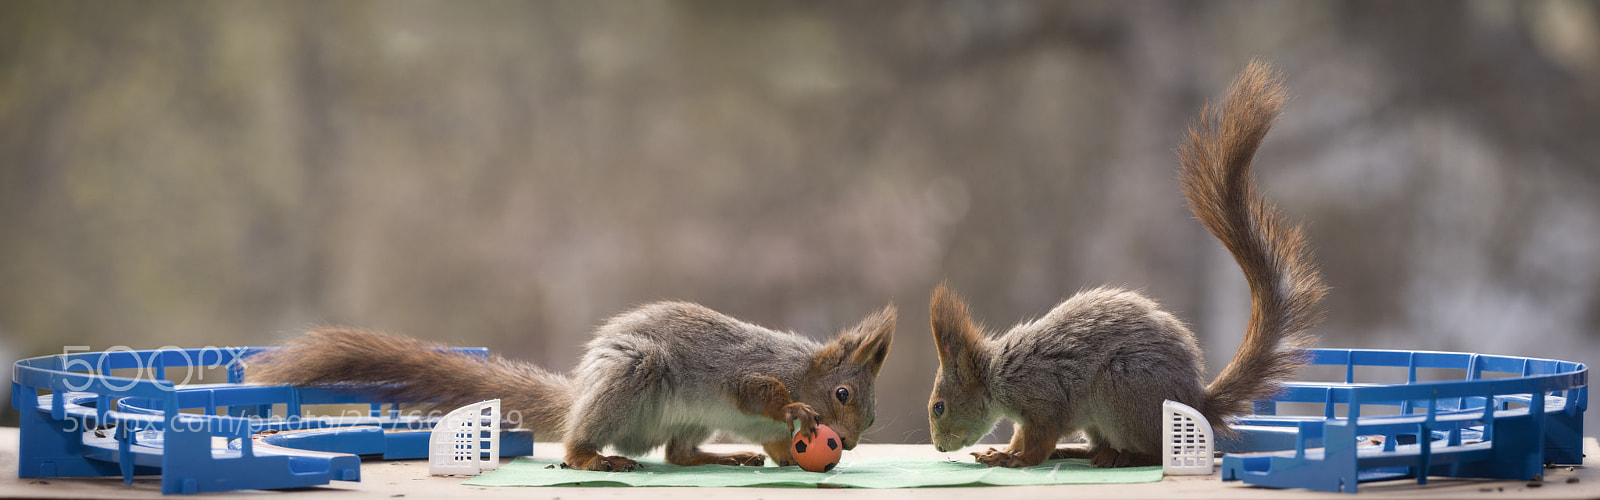 Nikon D810 sample photo. Red squirrels in an photography